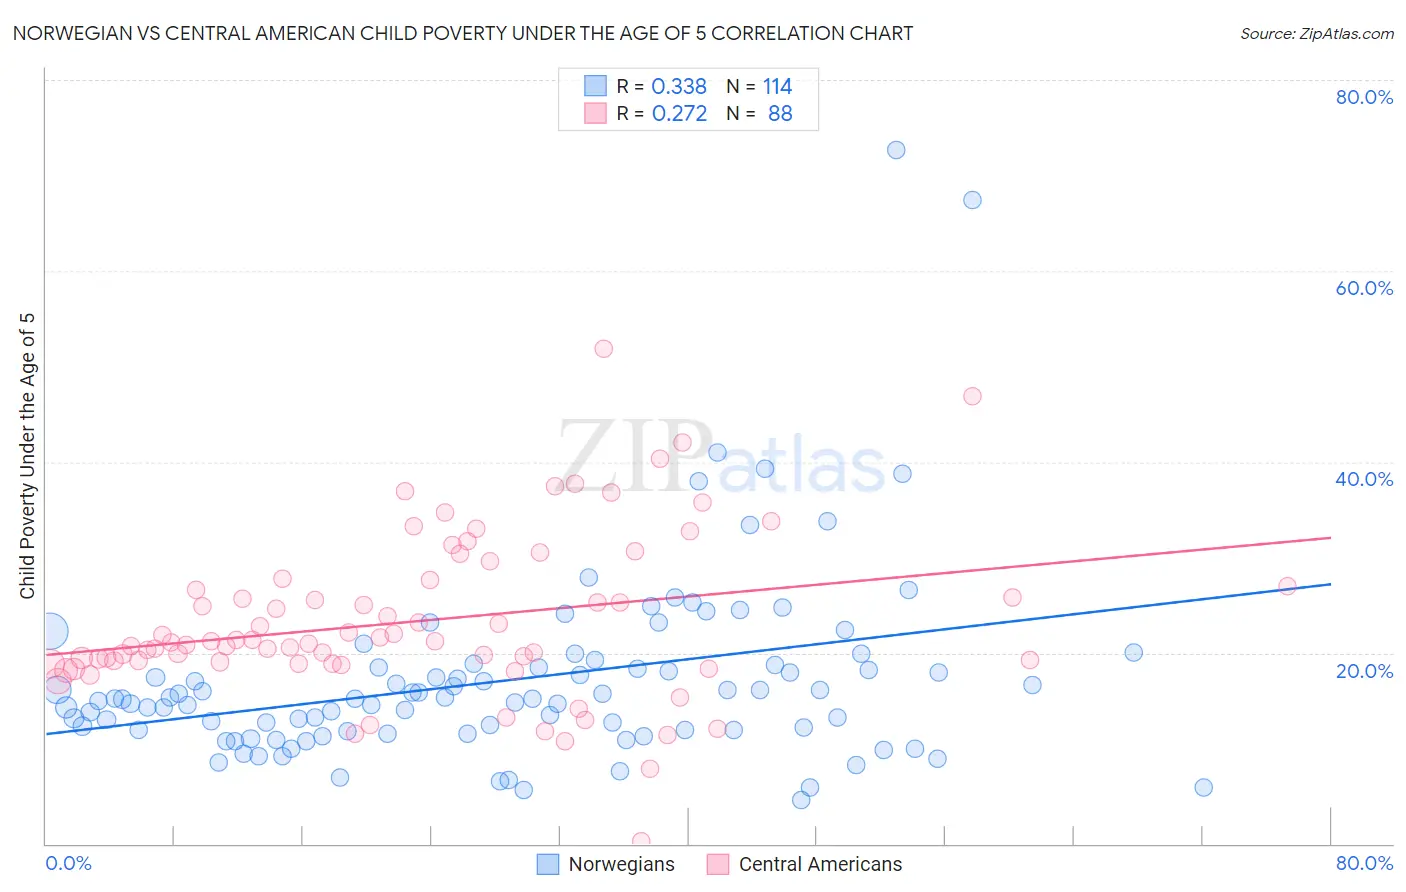 Norwegian vs Central American Child Poverty Under the Age of 5